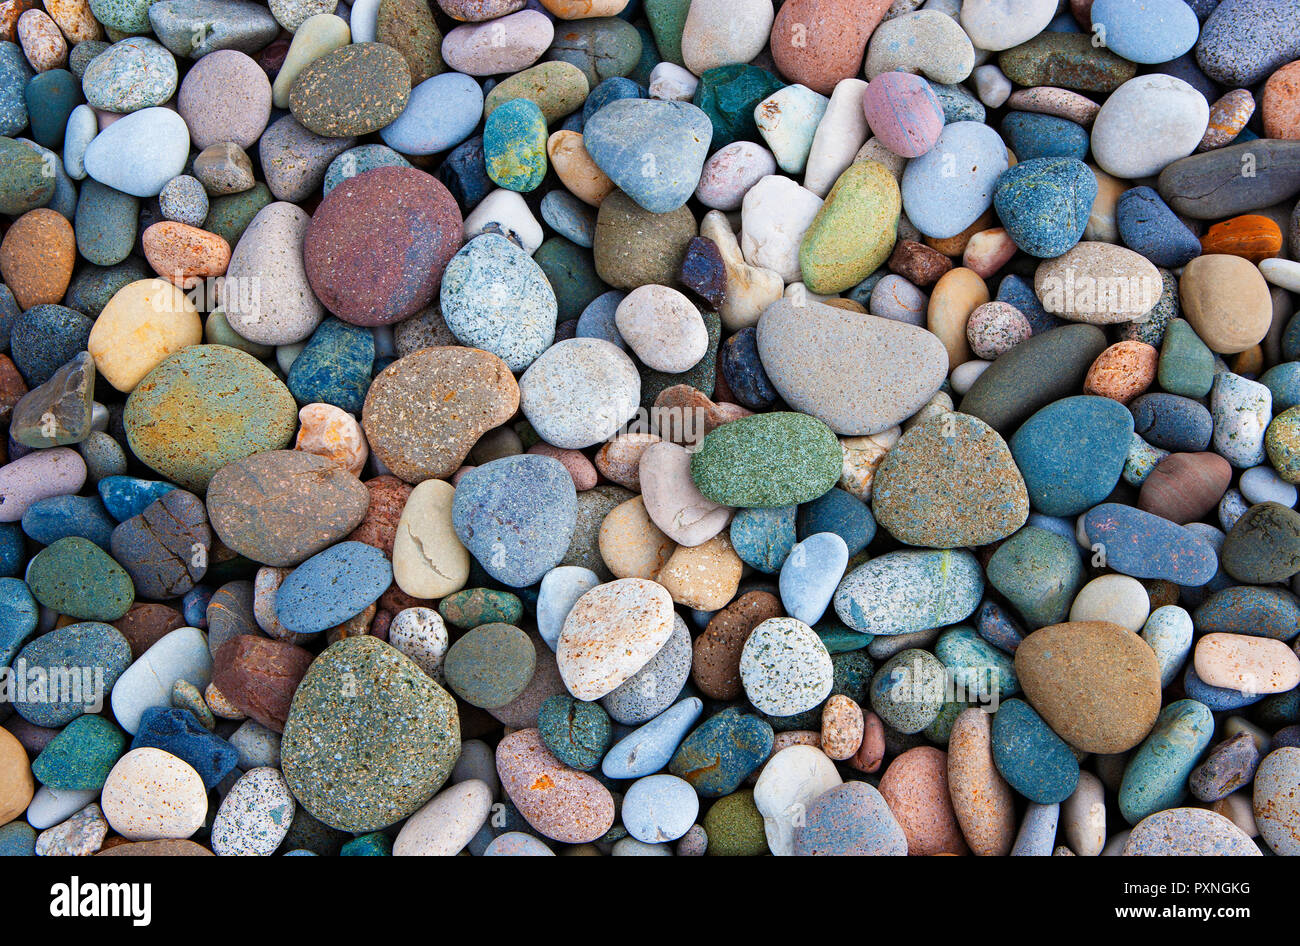 Colorful pebbles, full frame Stock Photo